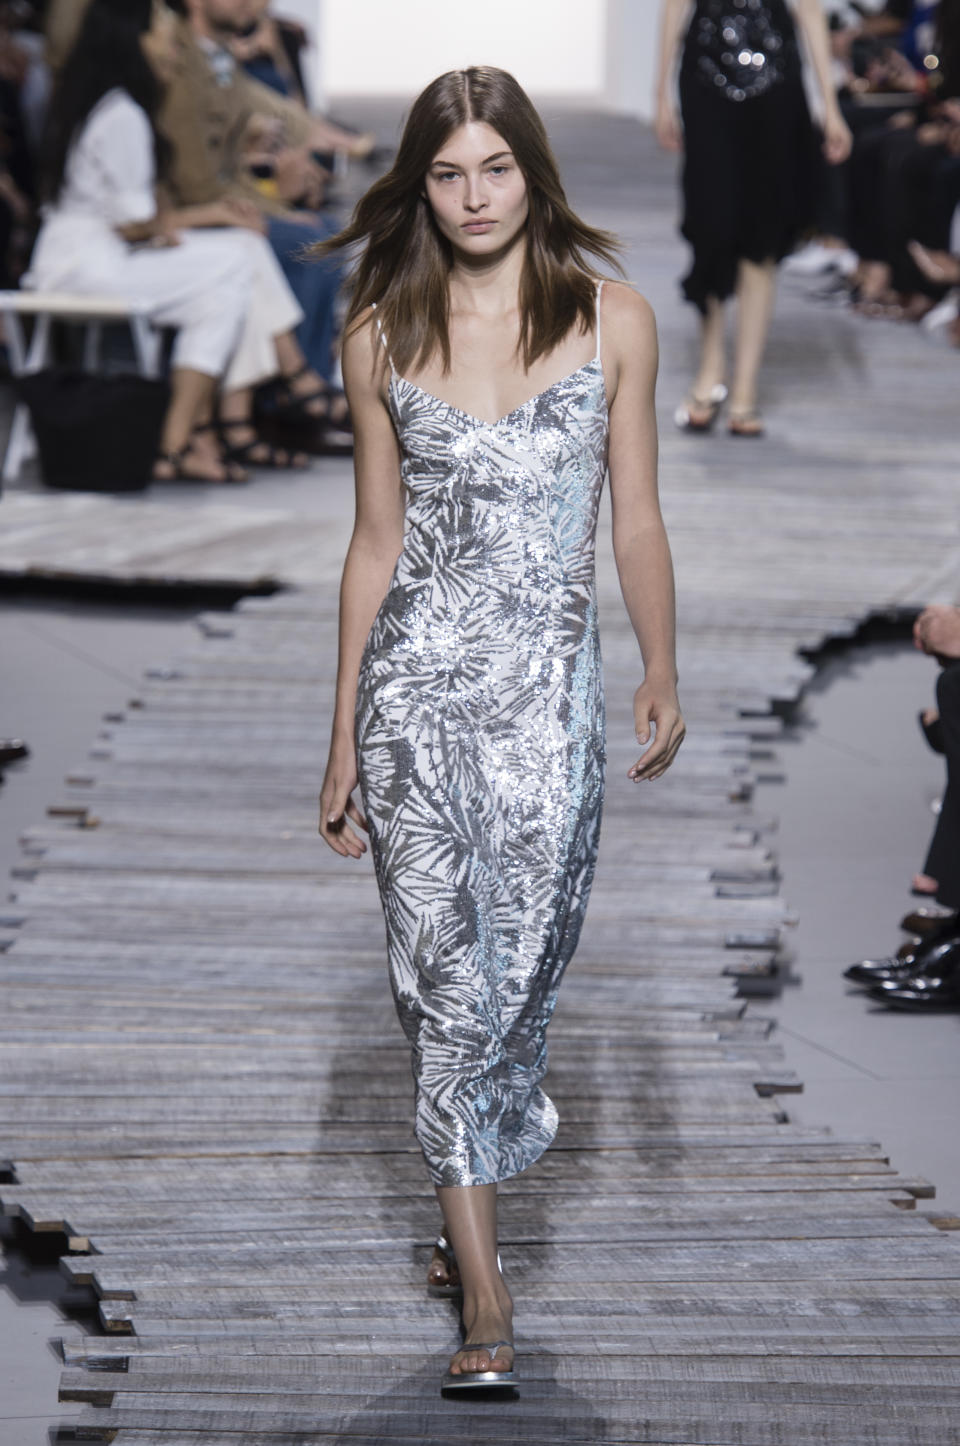 <p><i>Model wears a metallic palm tree print dress from the SS18 Michael Kors collection. (Photo: ImaxTree) </i></p>